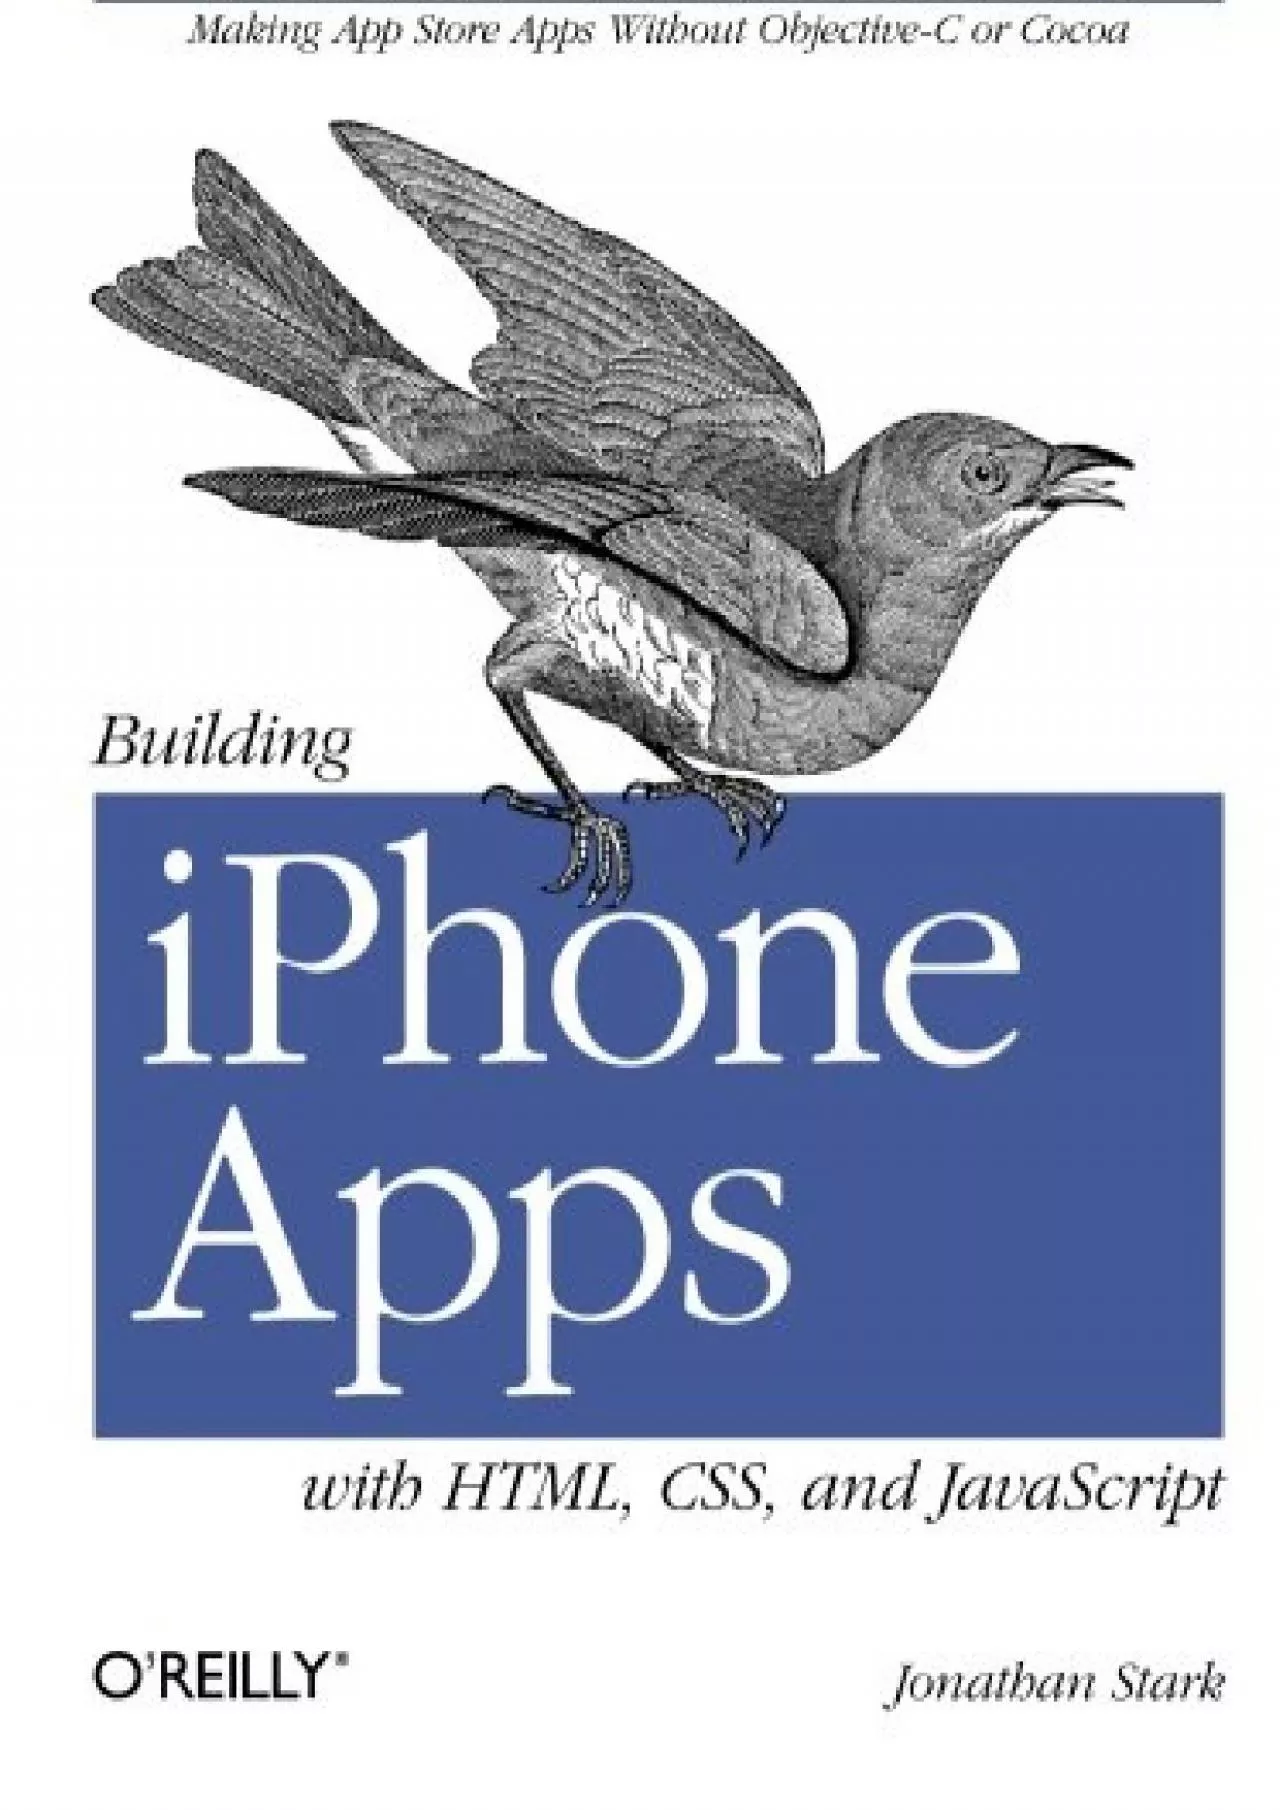 [PDF]-Building iPhone Apps with HTML, CSS, and JavaScript: Making App Store Apps Without